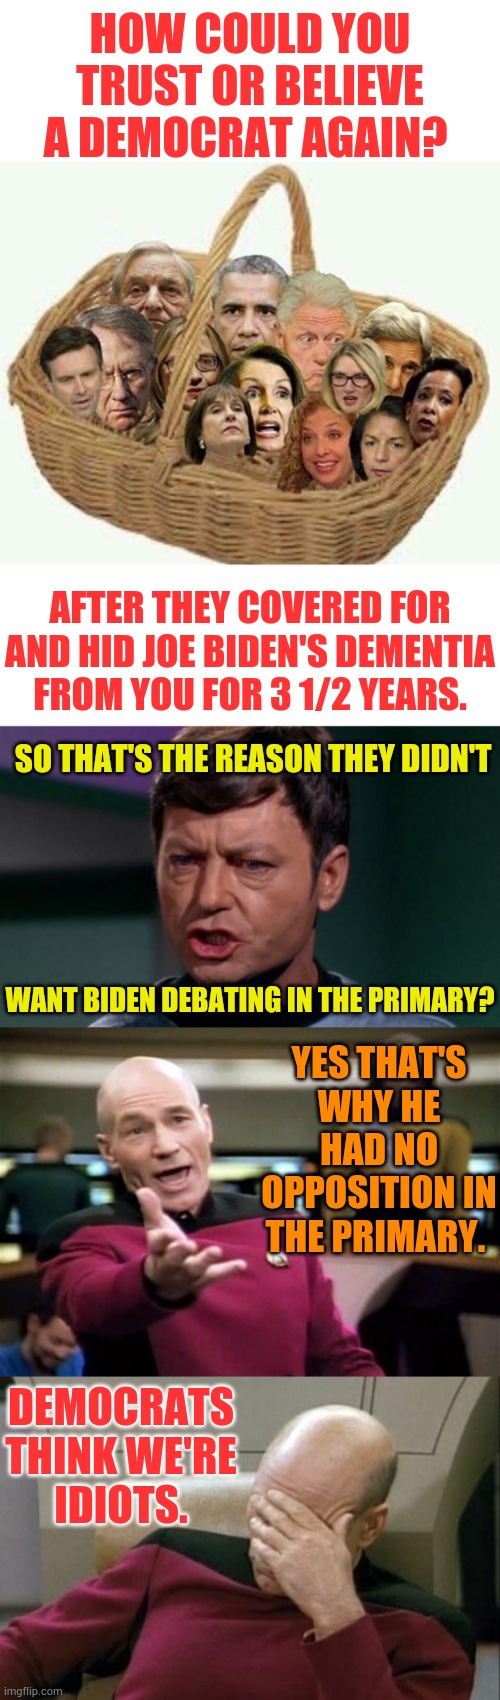 Democrats Think We're Idiots | HOW COULD YOU TRUST OR BELIEVE A DEMOCRAT AGAIN? AFTER THEY COVERED FOR AND HID JOE BIDEN'S DEMENTIA FROM YOU FOR 3 1/2 YEARS. SO THAT'S THE REASON THEY DIDN'T; YES THAT'S WHY HE HAD NO OPPOSITION IN THE PRIMARY. WANT BIDEN DEBATING IN THE PRIMARY? DEMOCRATS THINK WE'RE IDIOTS. | image tagged in startrek,memes,democrats,think,we're,idiots | made w/ Imgflip meme maker